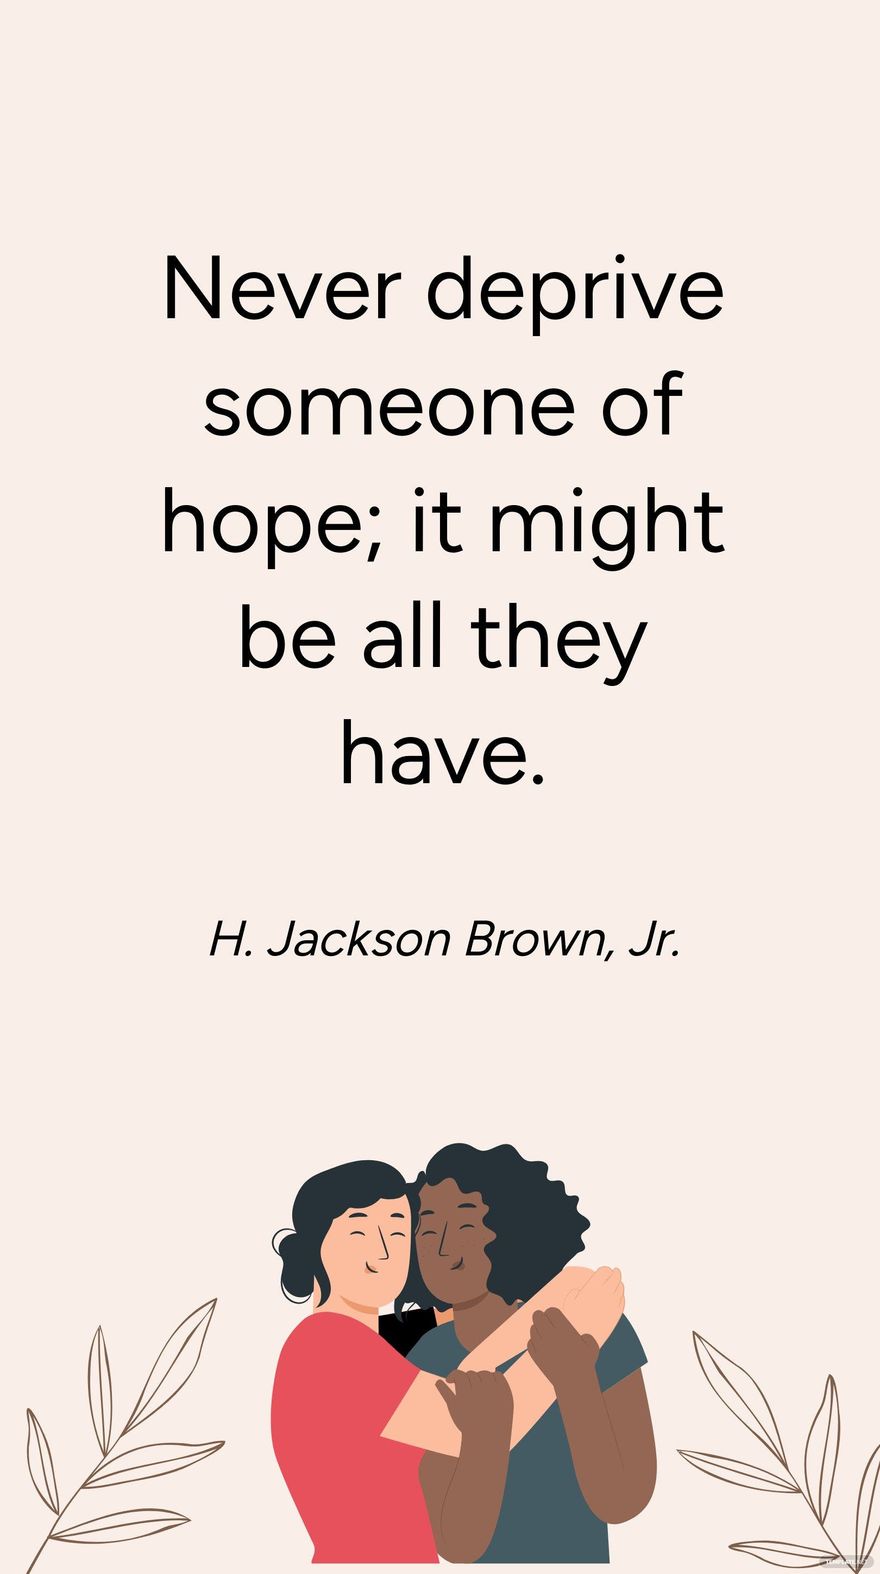 Free H. Jackson Brown, Jr. - Never deprive someone of hope; it might be all they have.